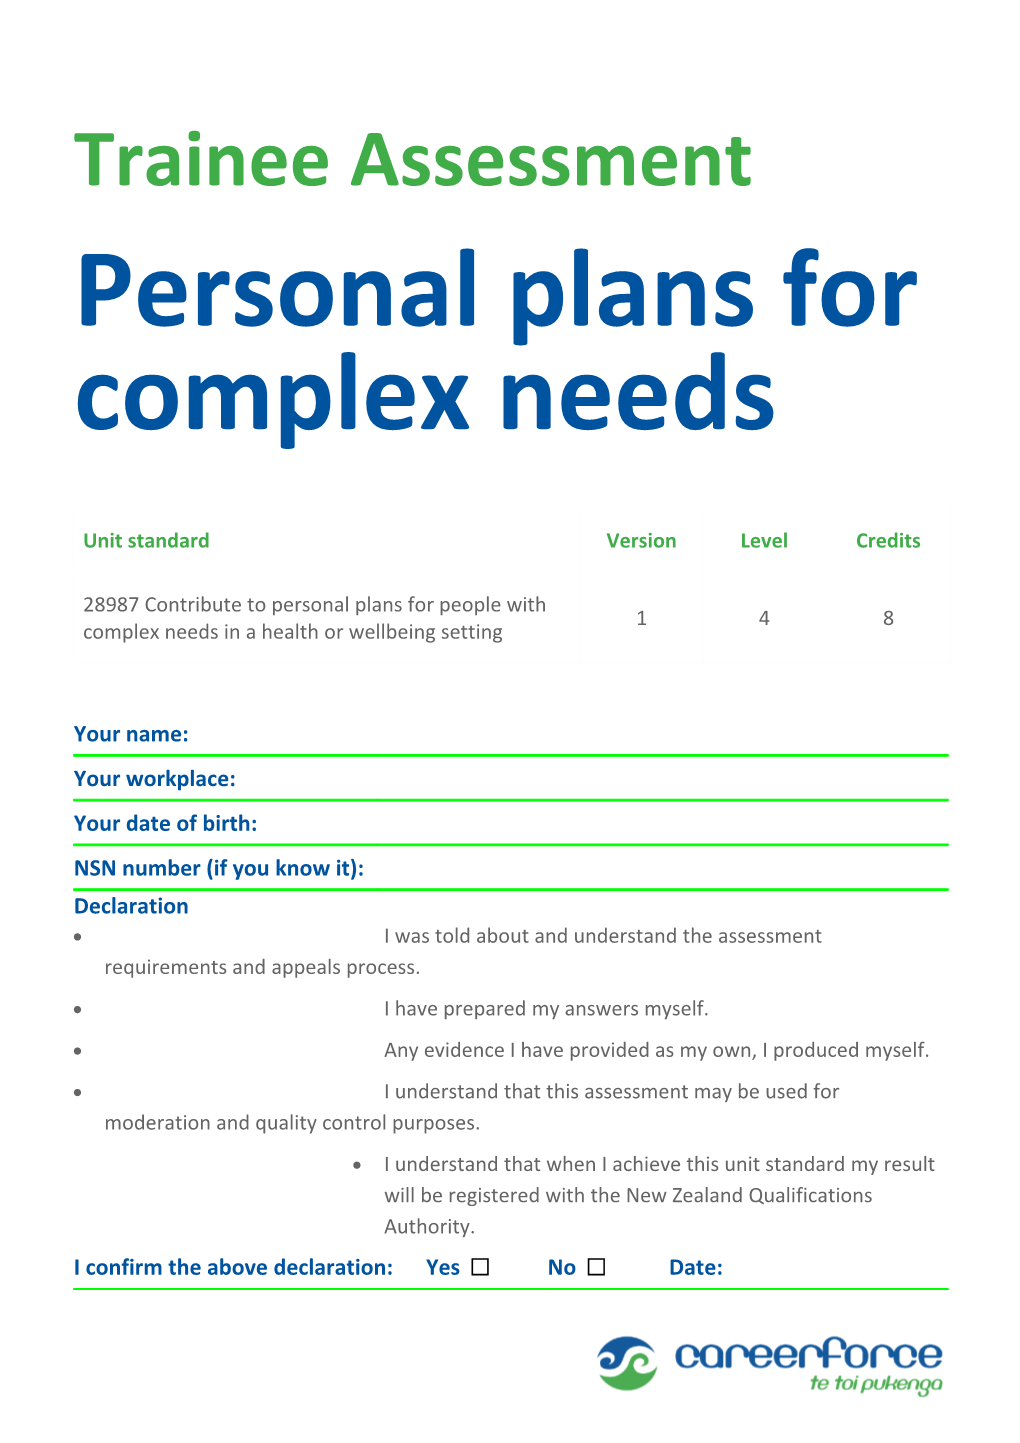 Personal Plans for Complex Needs